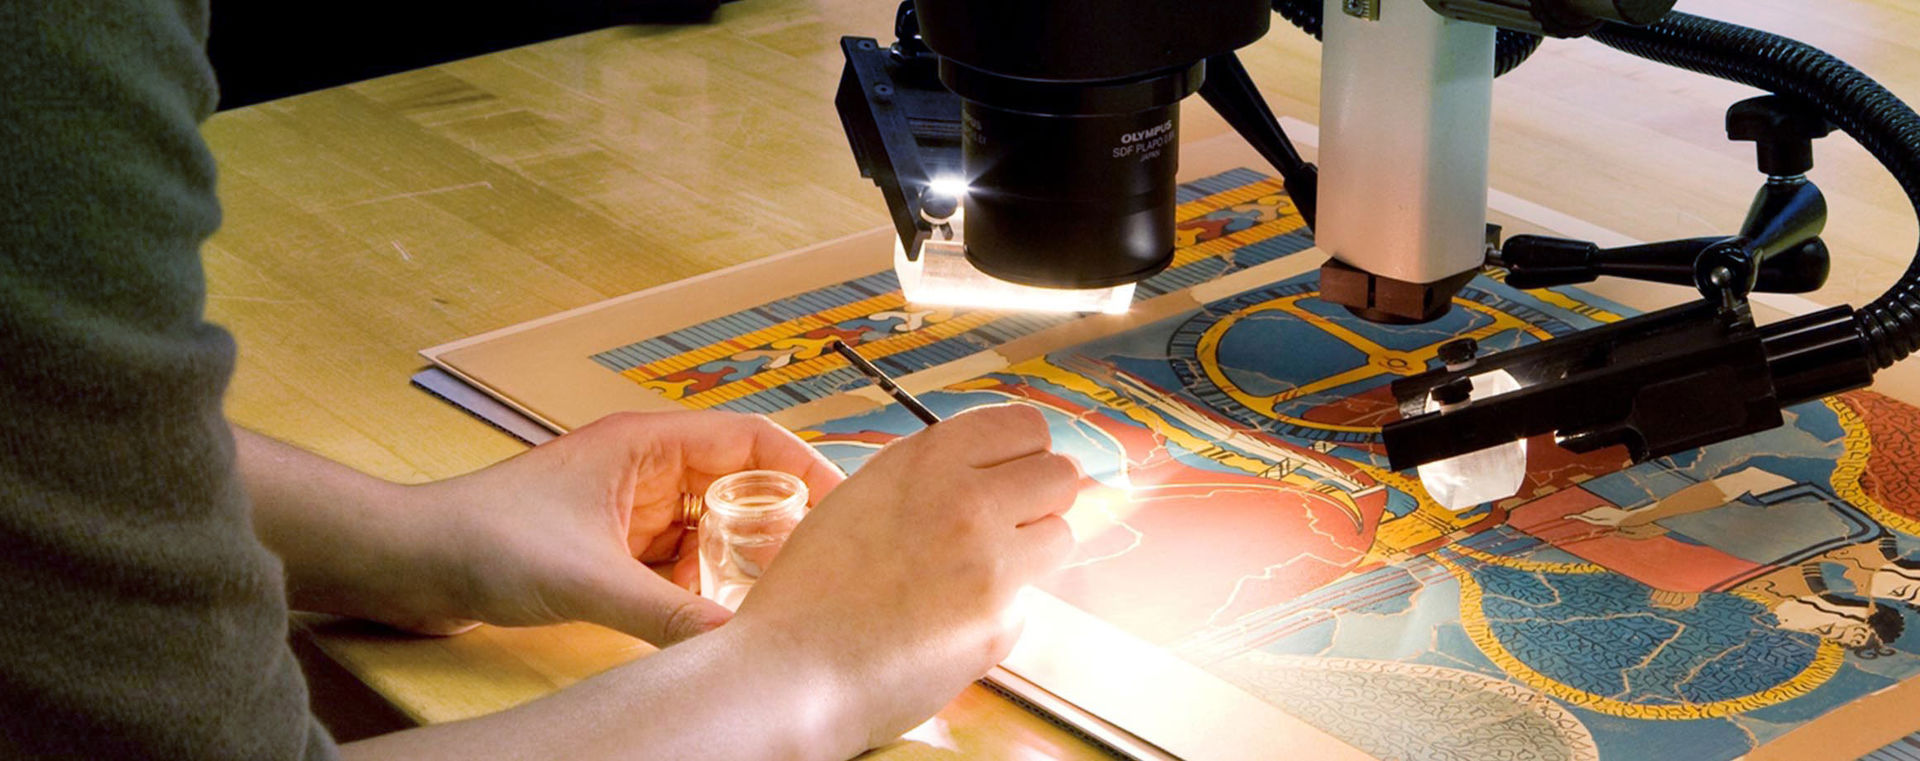 A woman looking through a telescope, examining a colorful work of art on paper